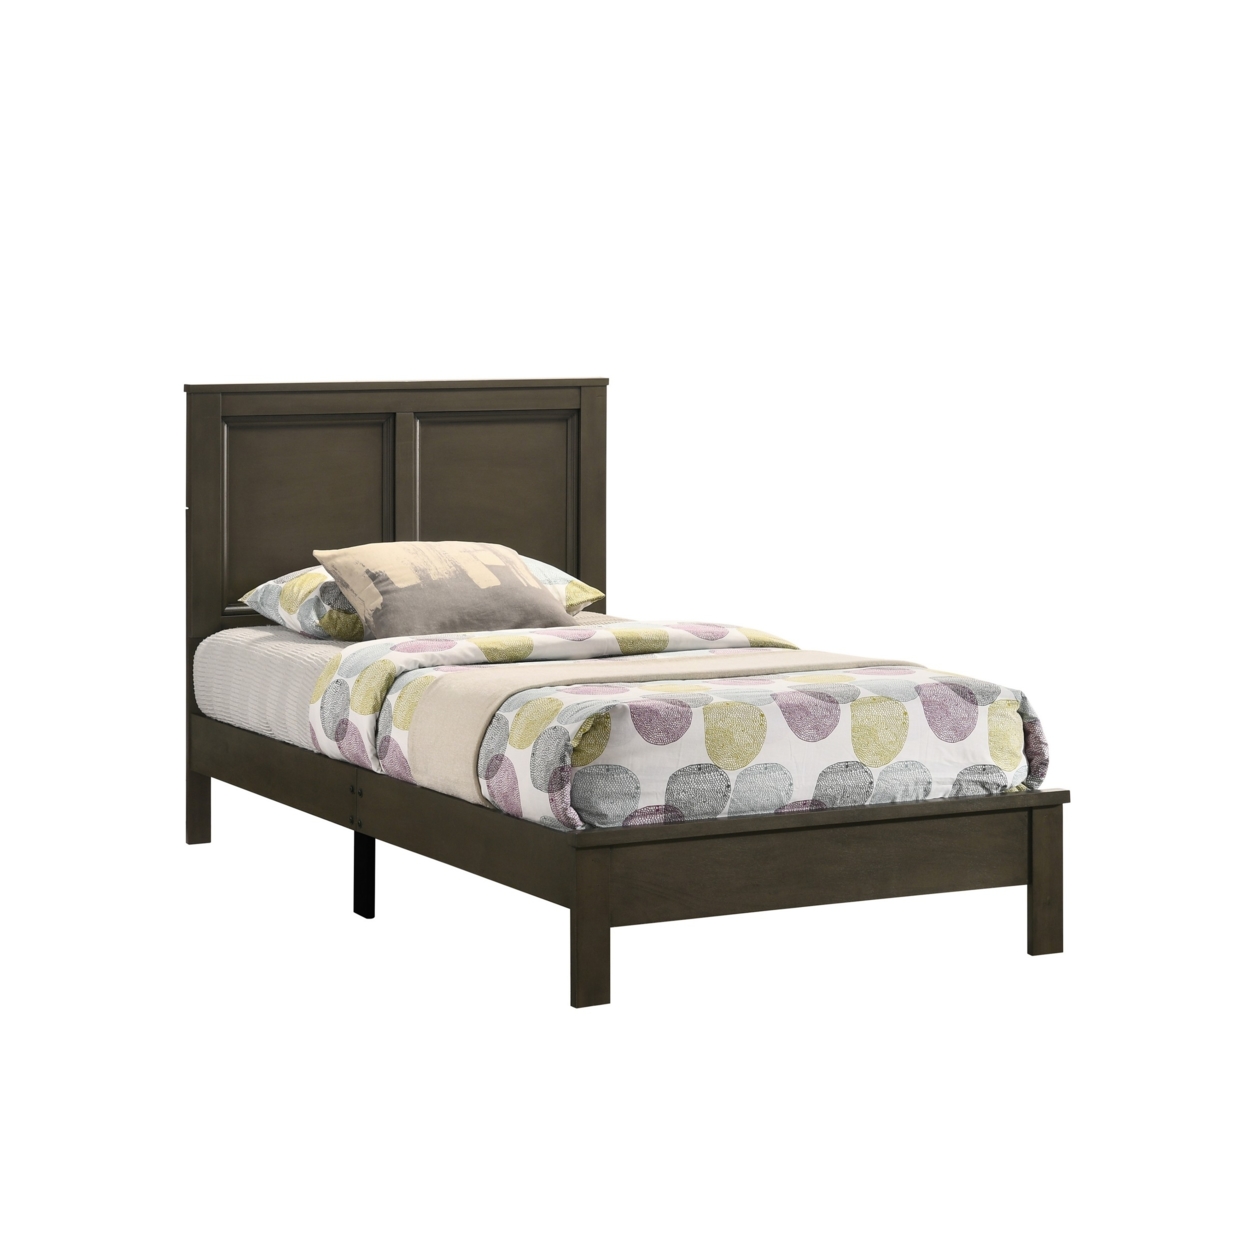 Isla Full Size Panel Bed With Low Profile Rubberwood Frame, Taupe Brown- Saltoro Sherpi